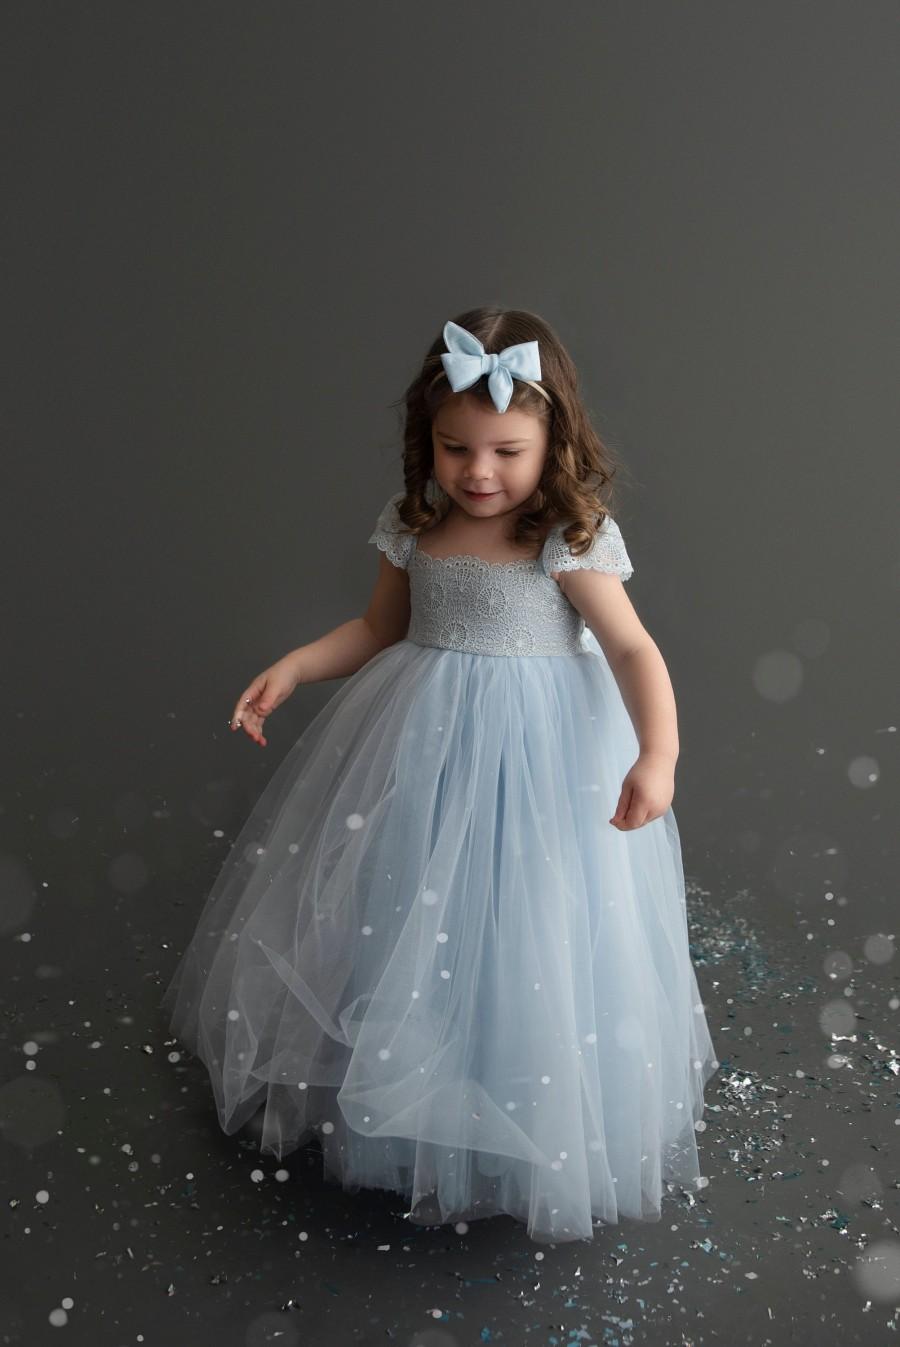 Hochzeit - Tulip Light Blue Flower Girl Dress Dresses Ice Outfit Girls Tulle Lace Newborn Princess 1st Birthday Tutu Baby Gown Photoshoot Infant Formal